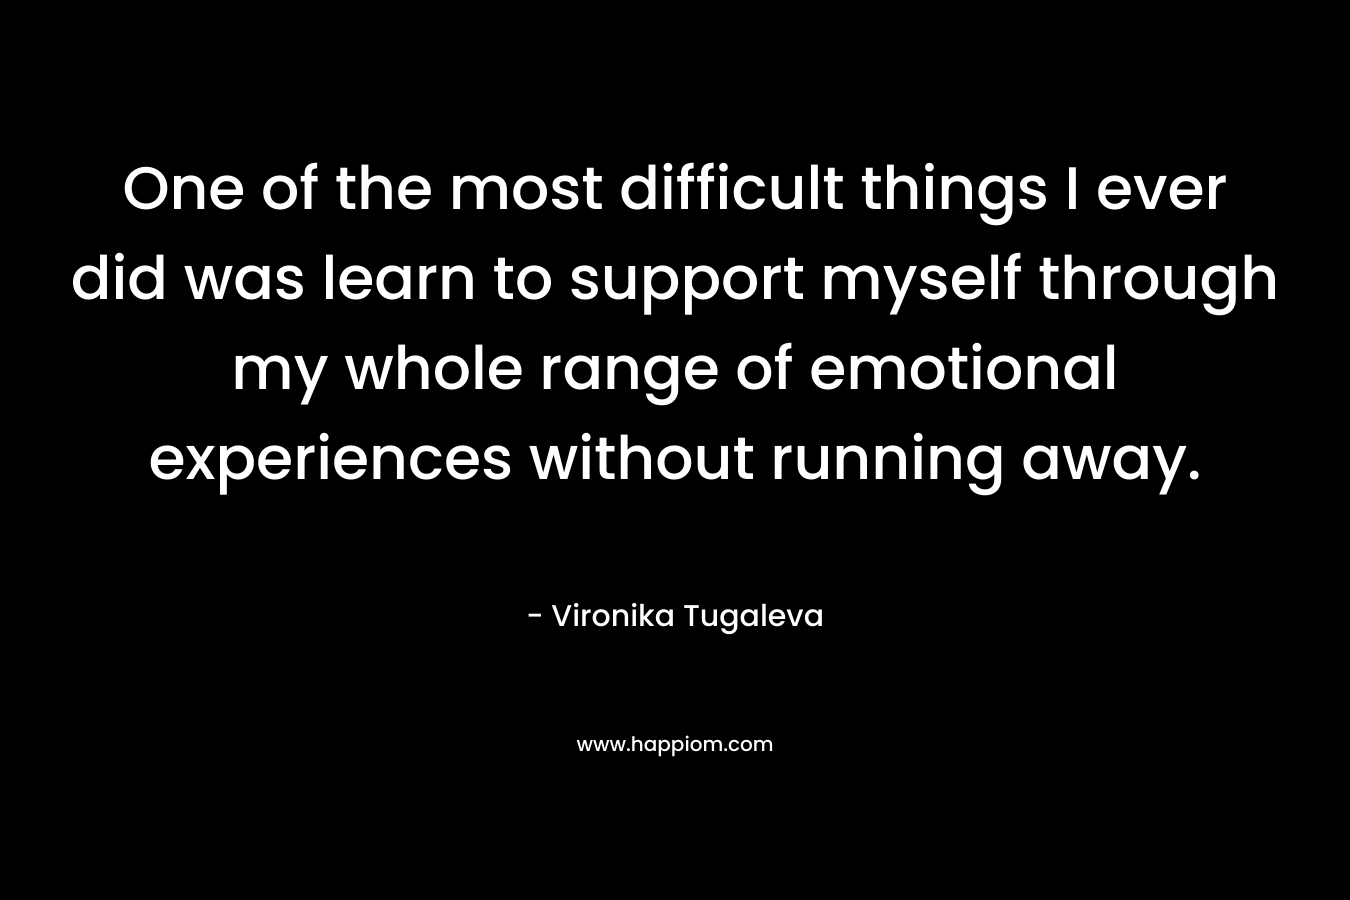 One of the most difficult things I ever did was learn to support myself through my whole range of emotional experiences without running away.